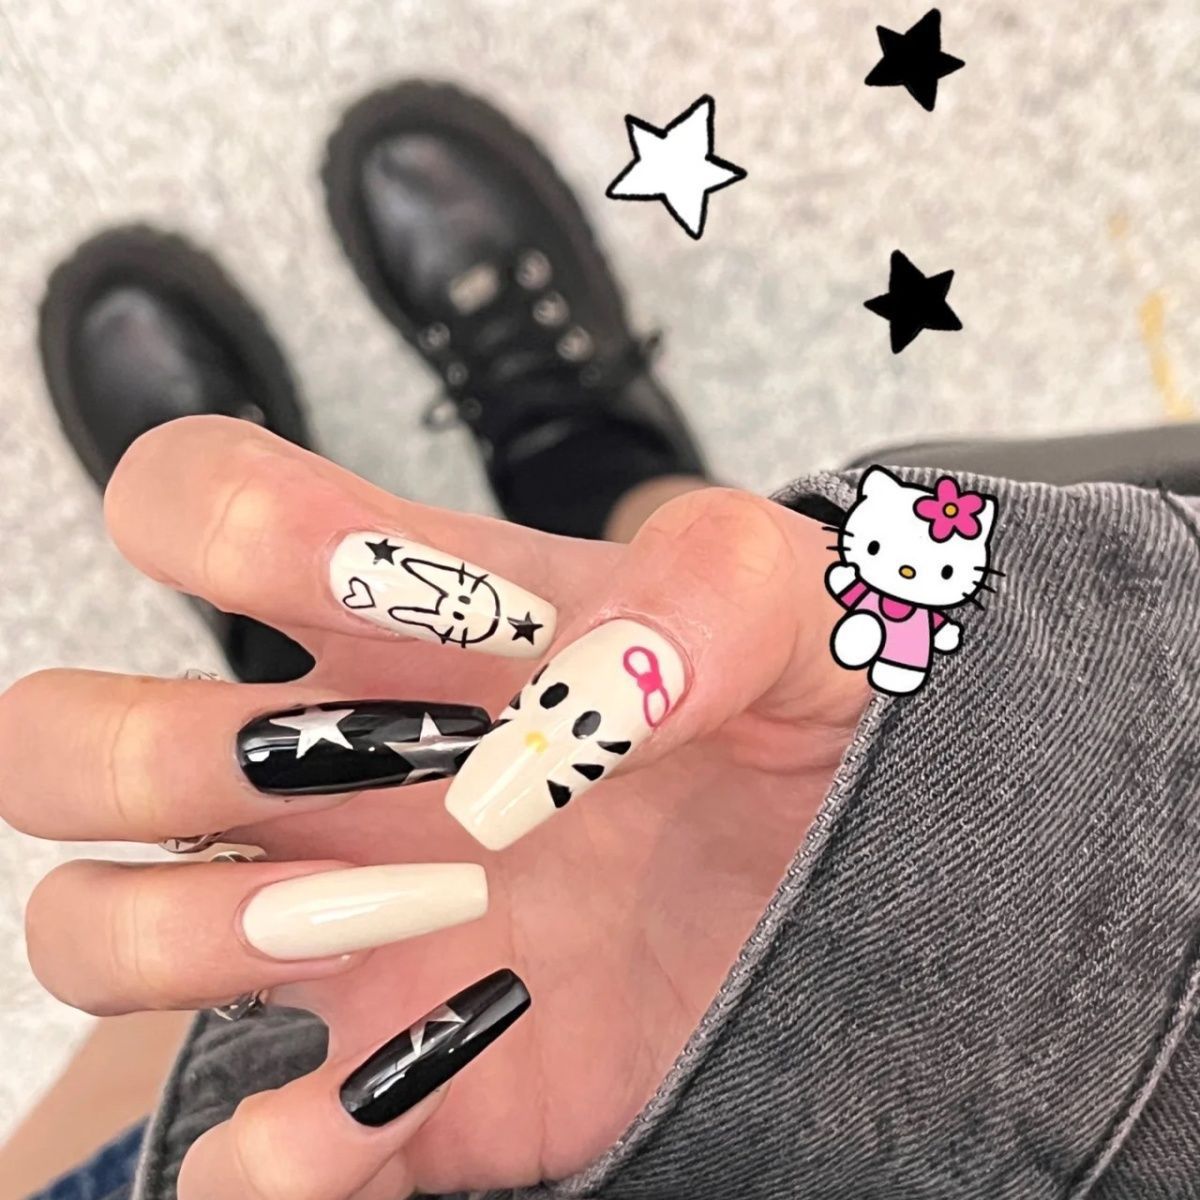 CAT-TEN PIECES OF HANDCRAFTED PRESS ON NAIL